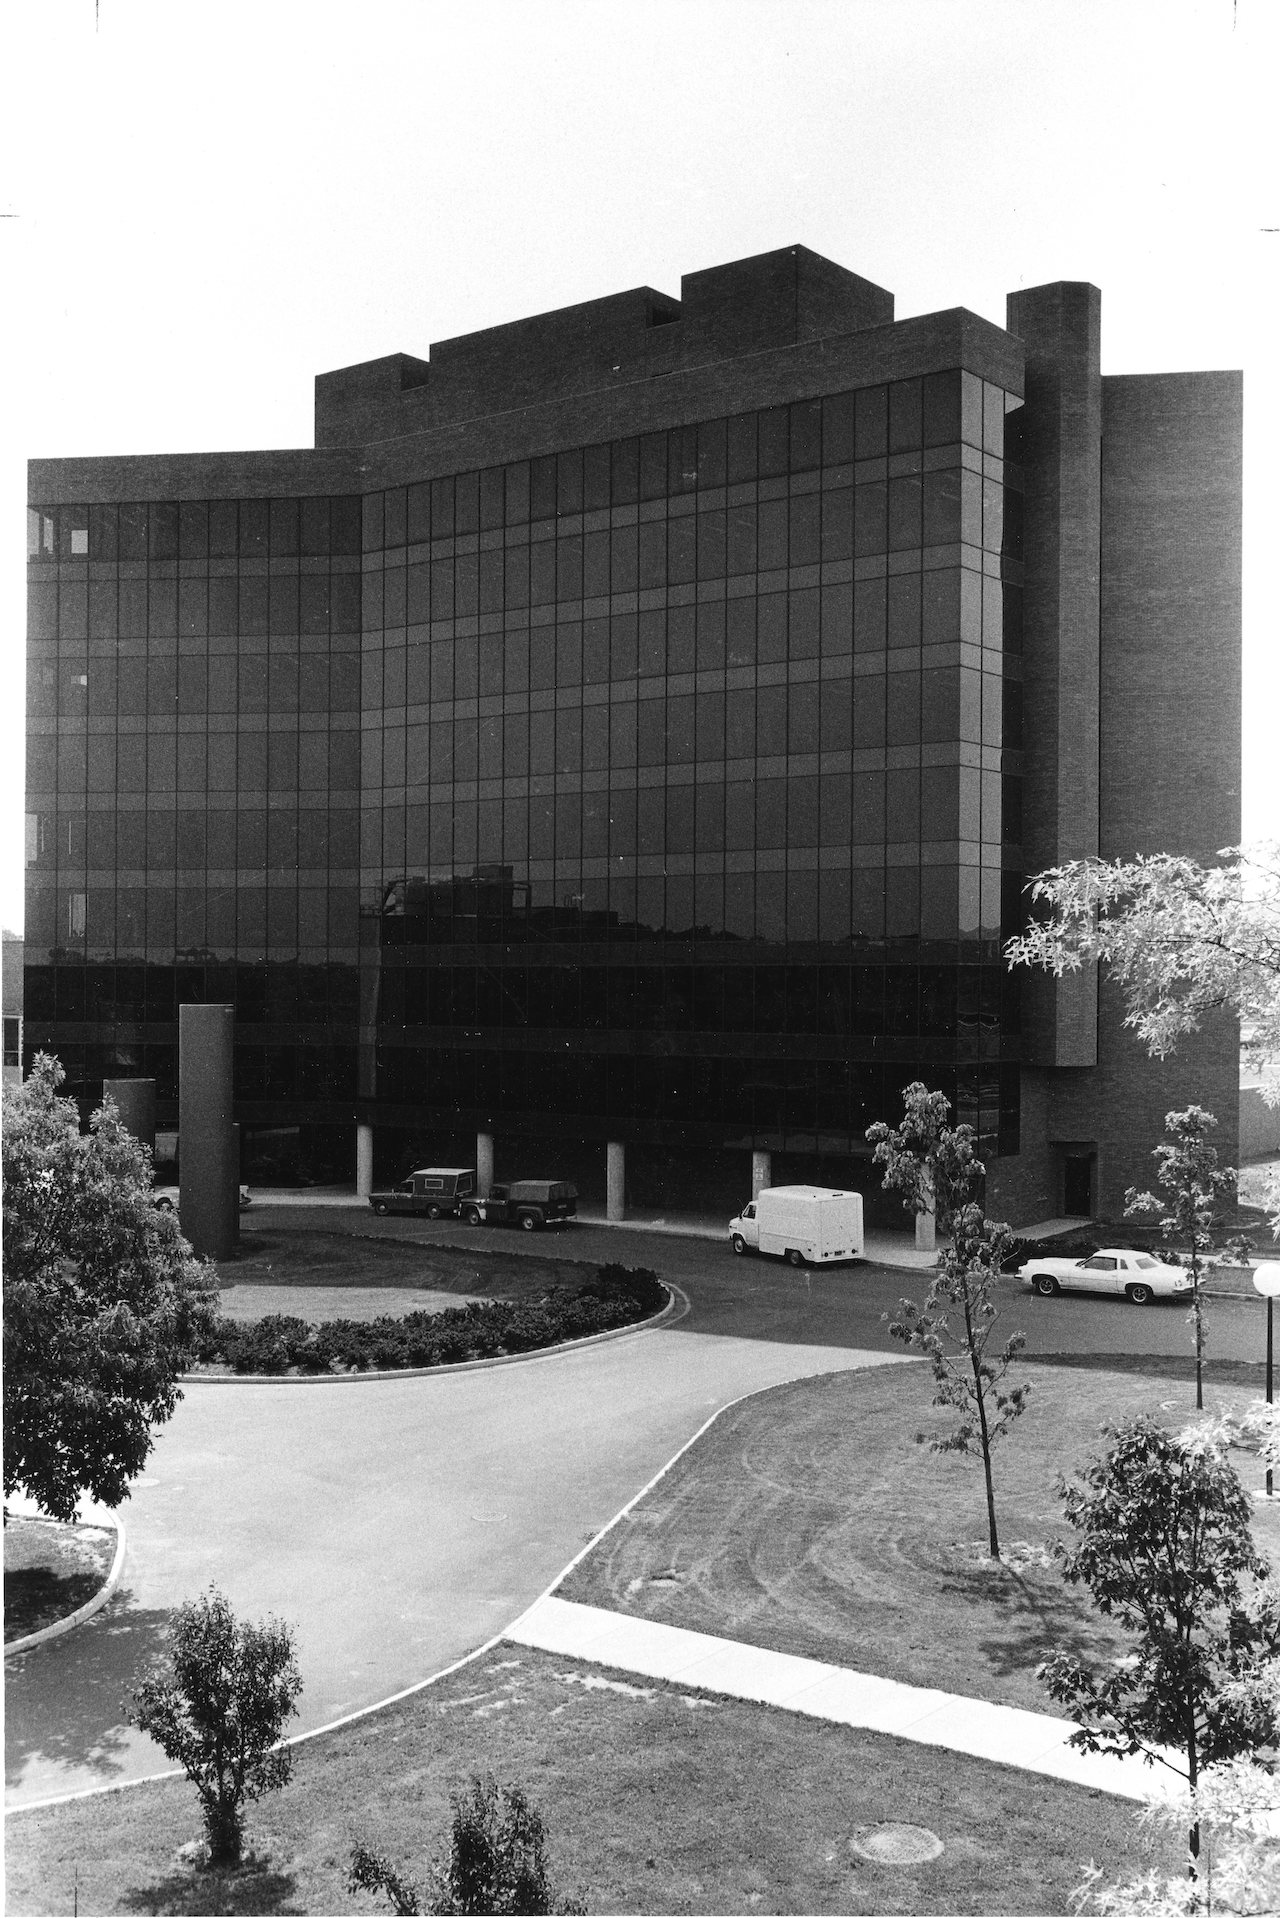 The Veterinary Research Tower in 1974